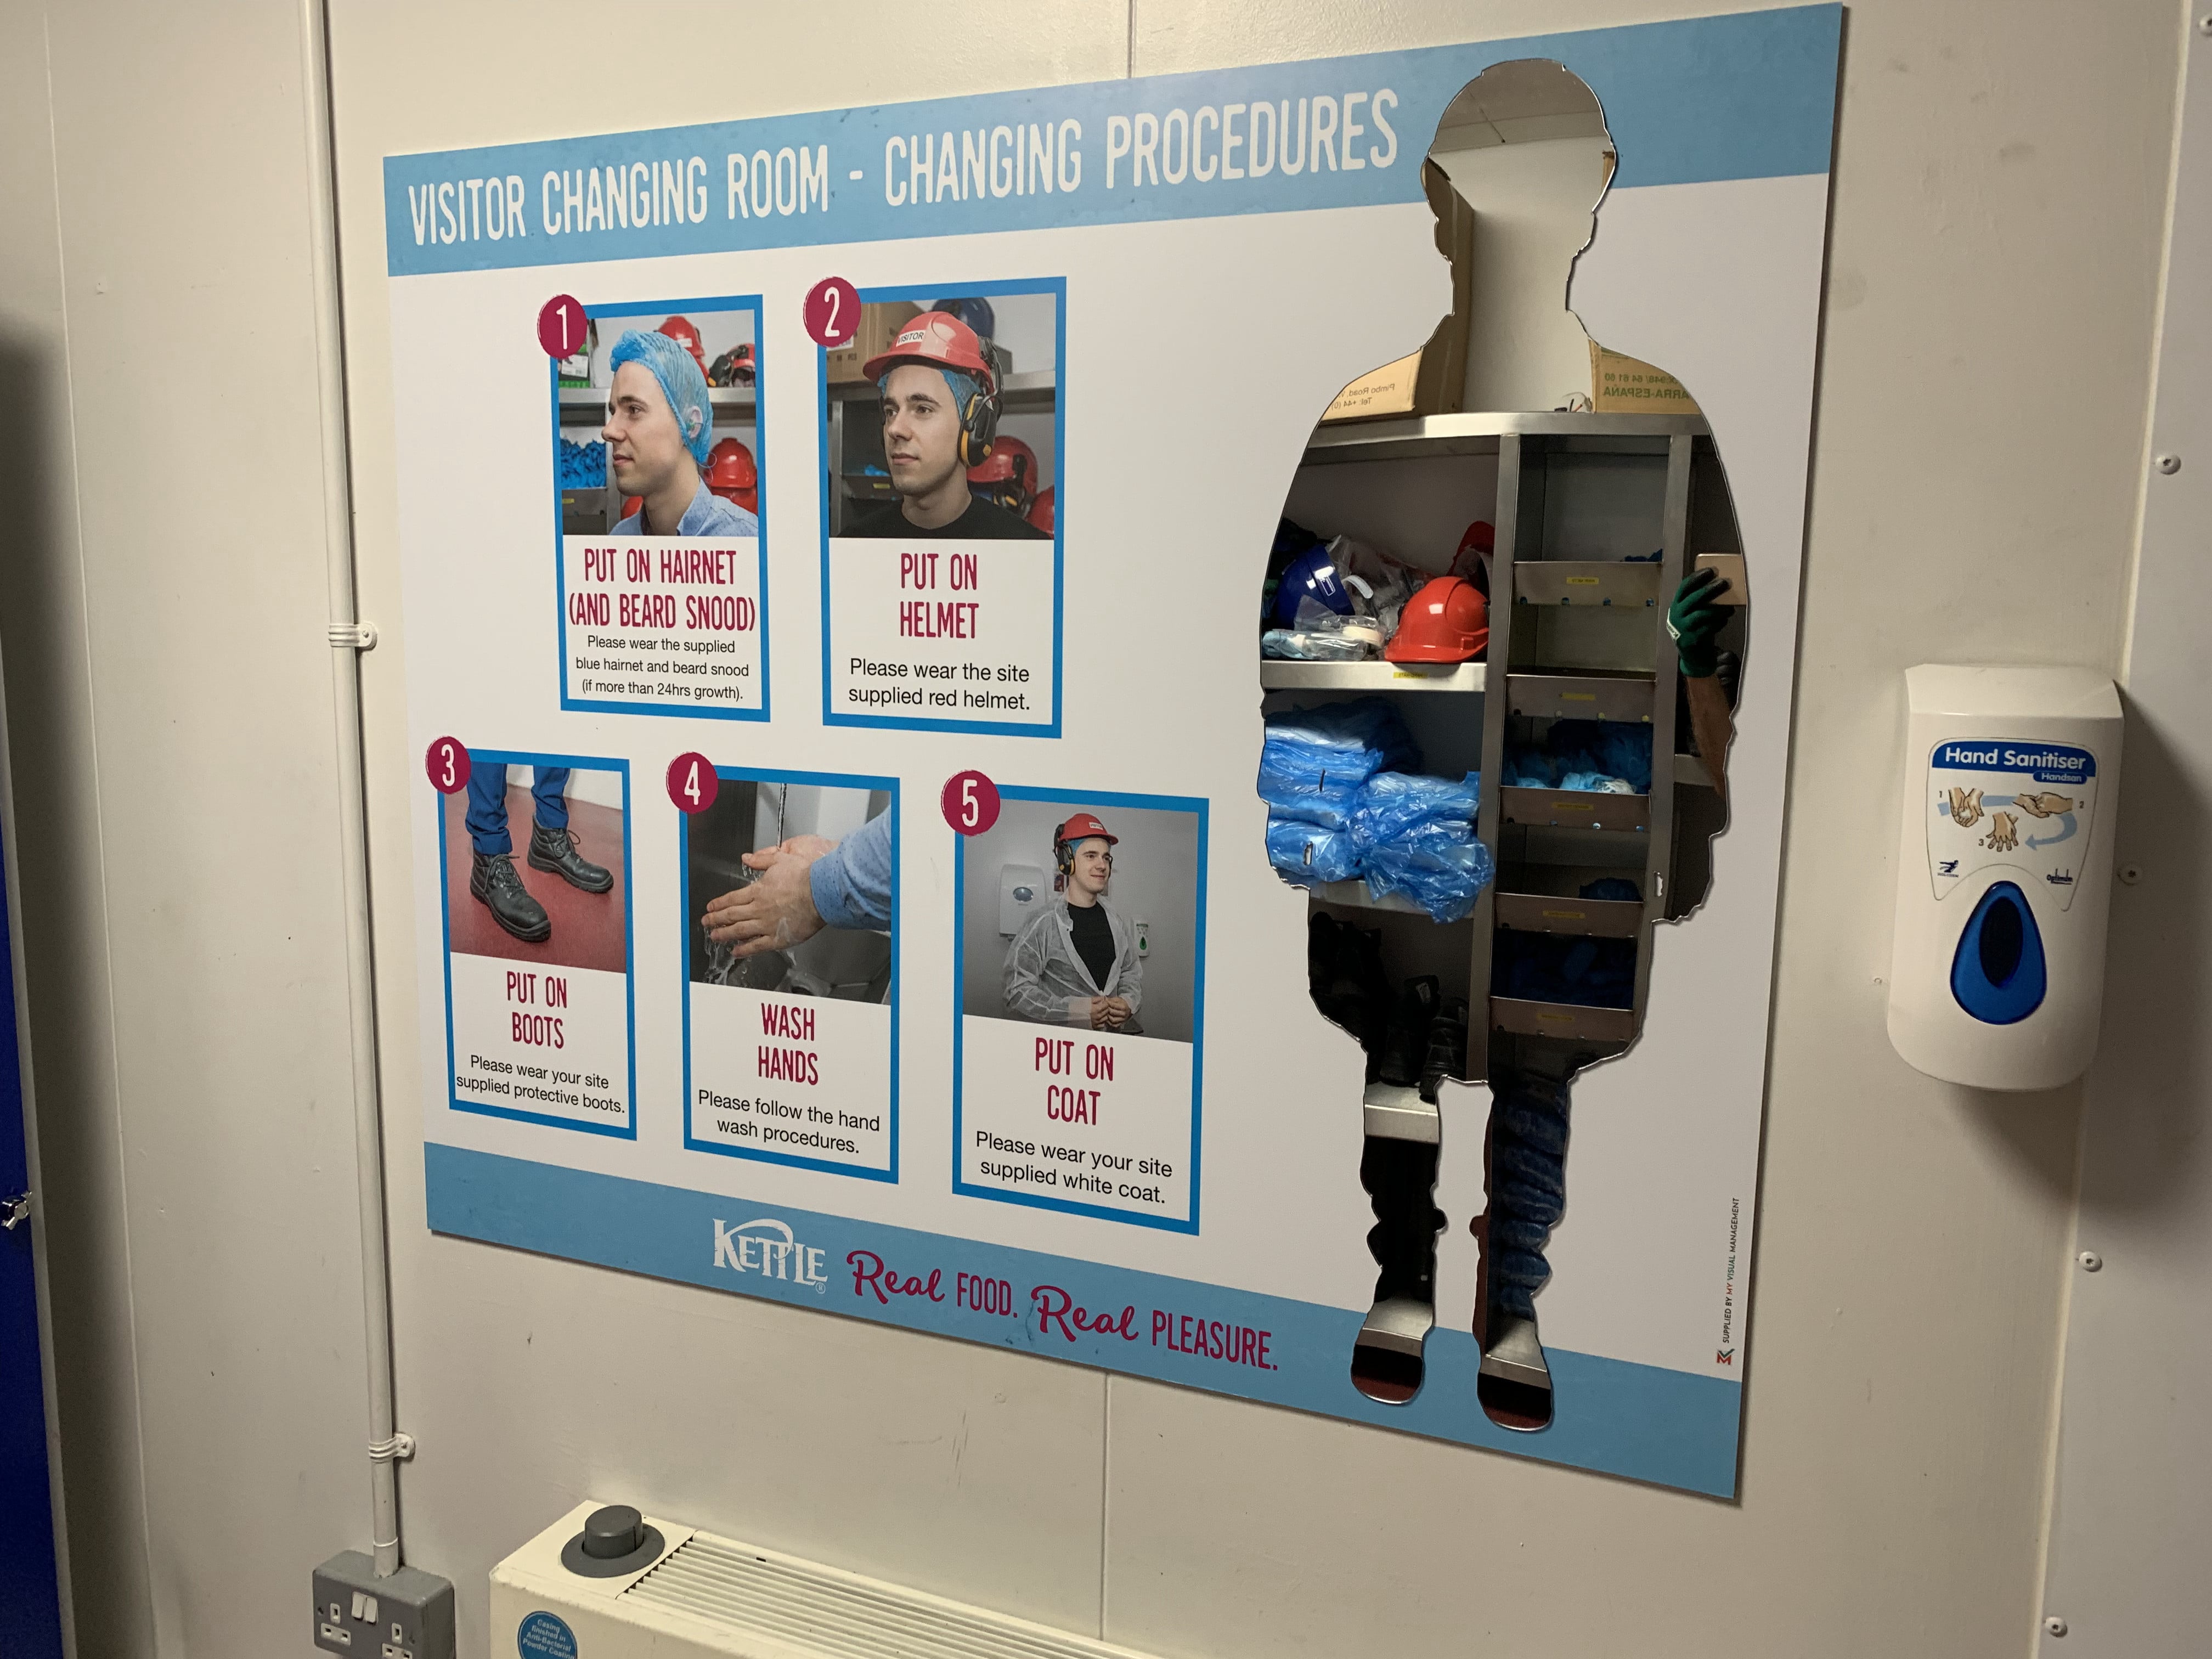 Changing Procedures board with mirror